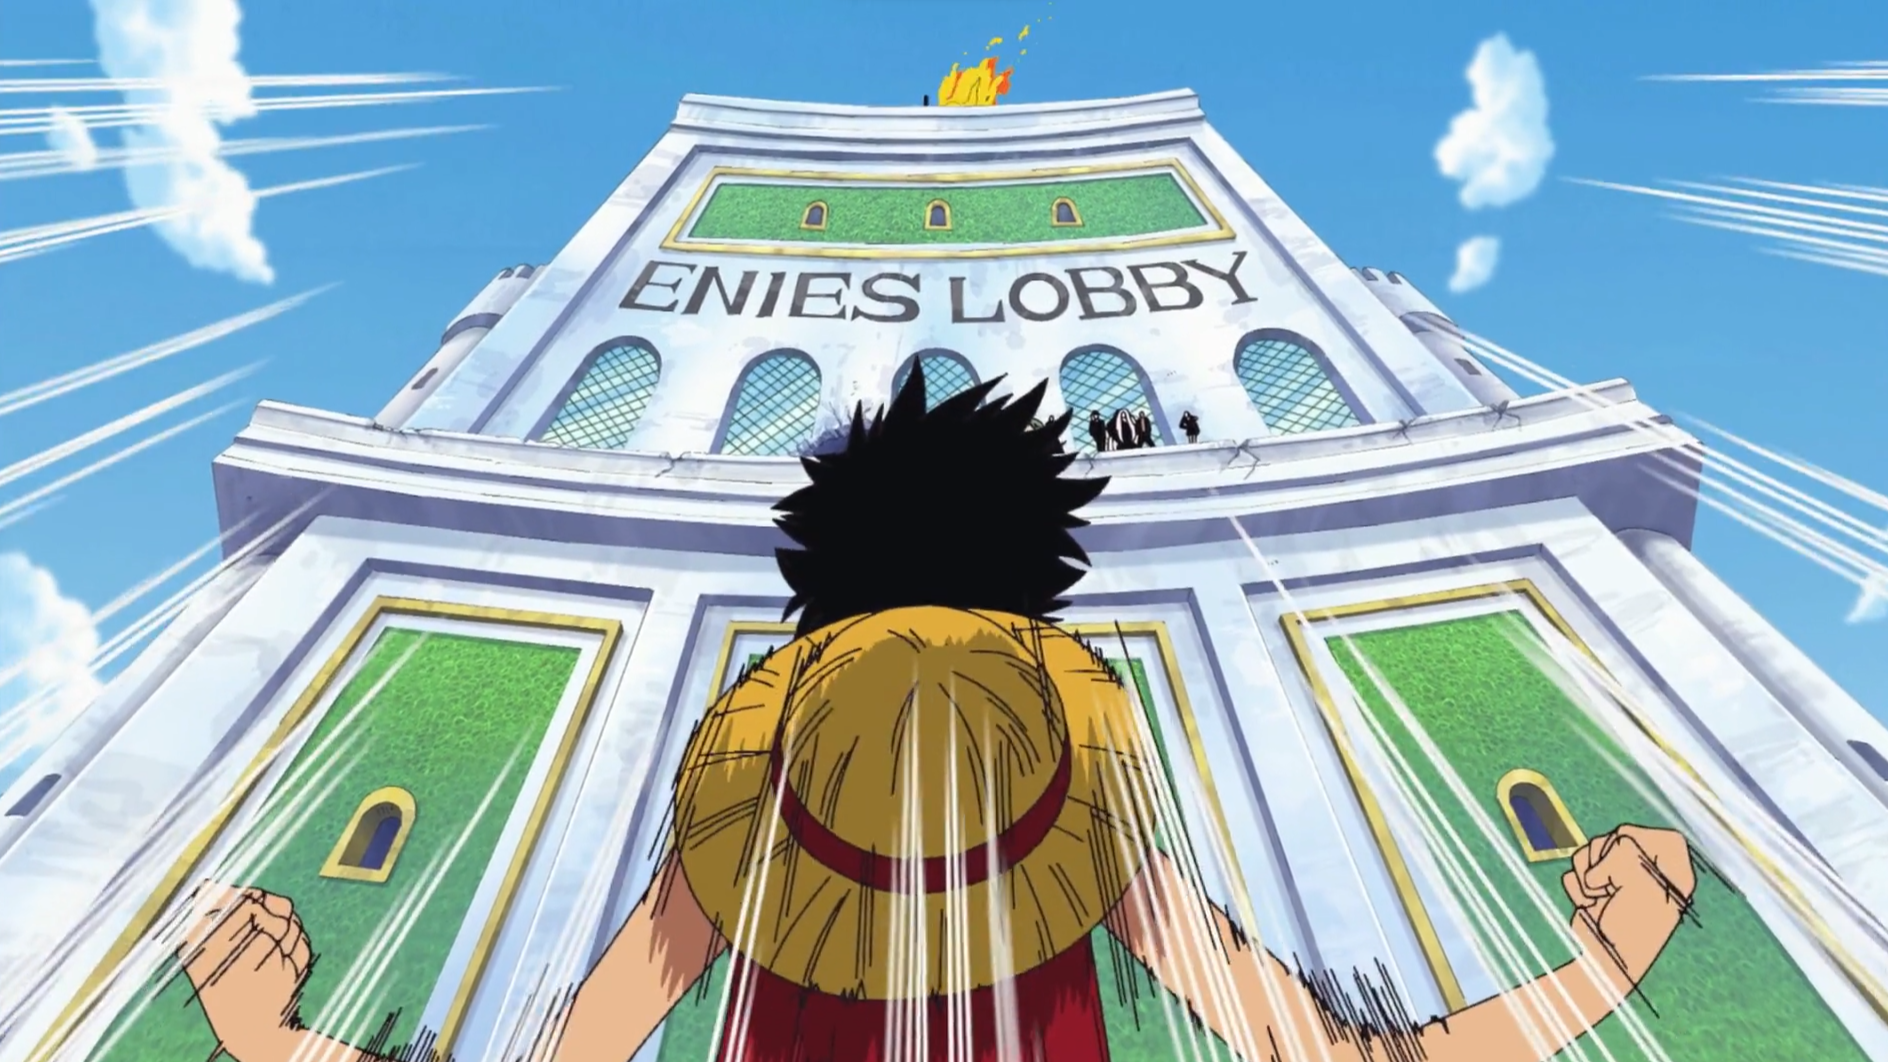 One Piece Enies Lobby Arc Luffy Declares War On The World Goverment